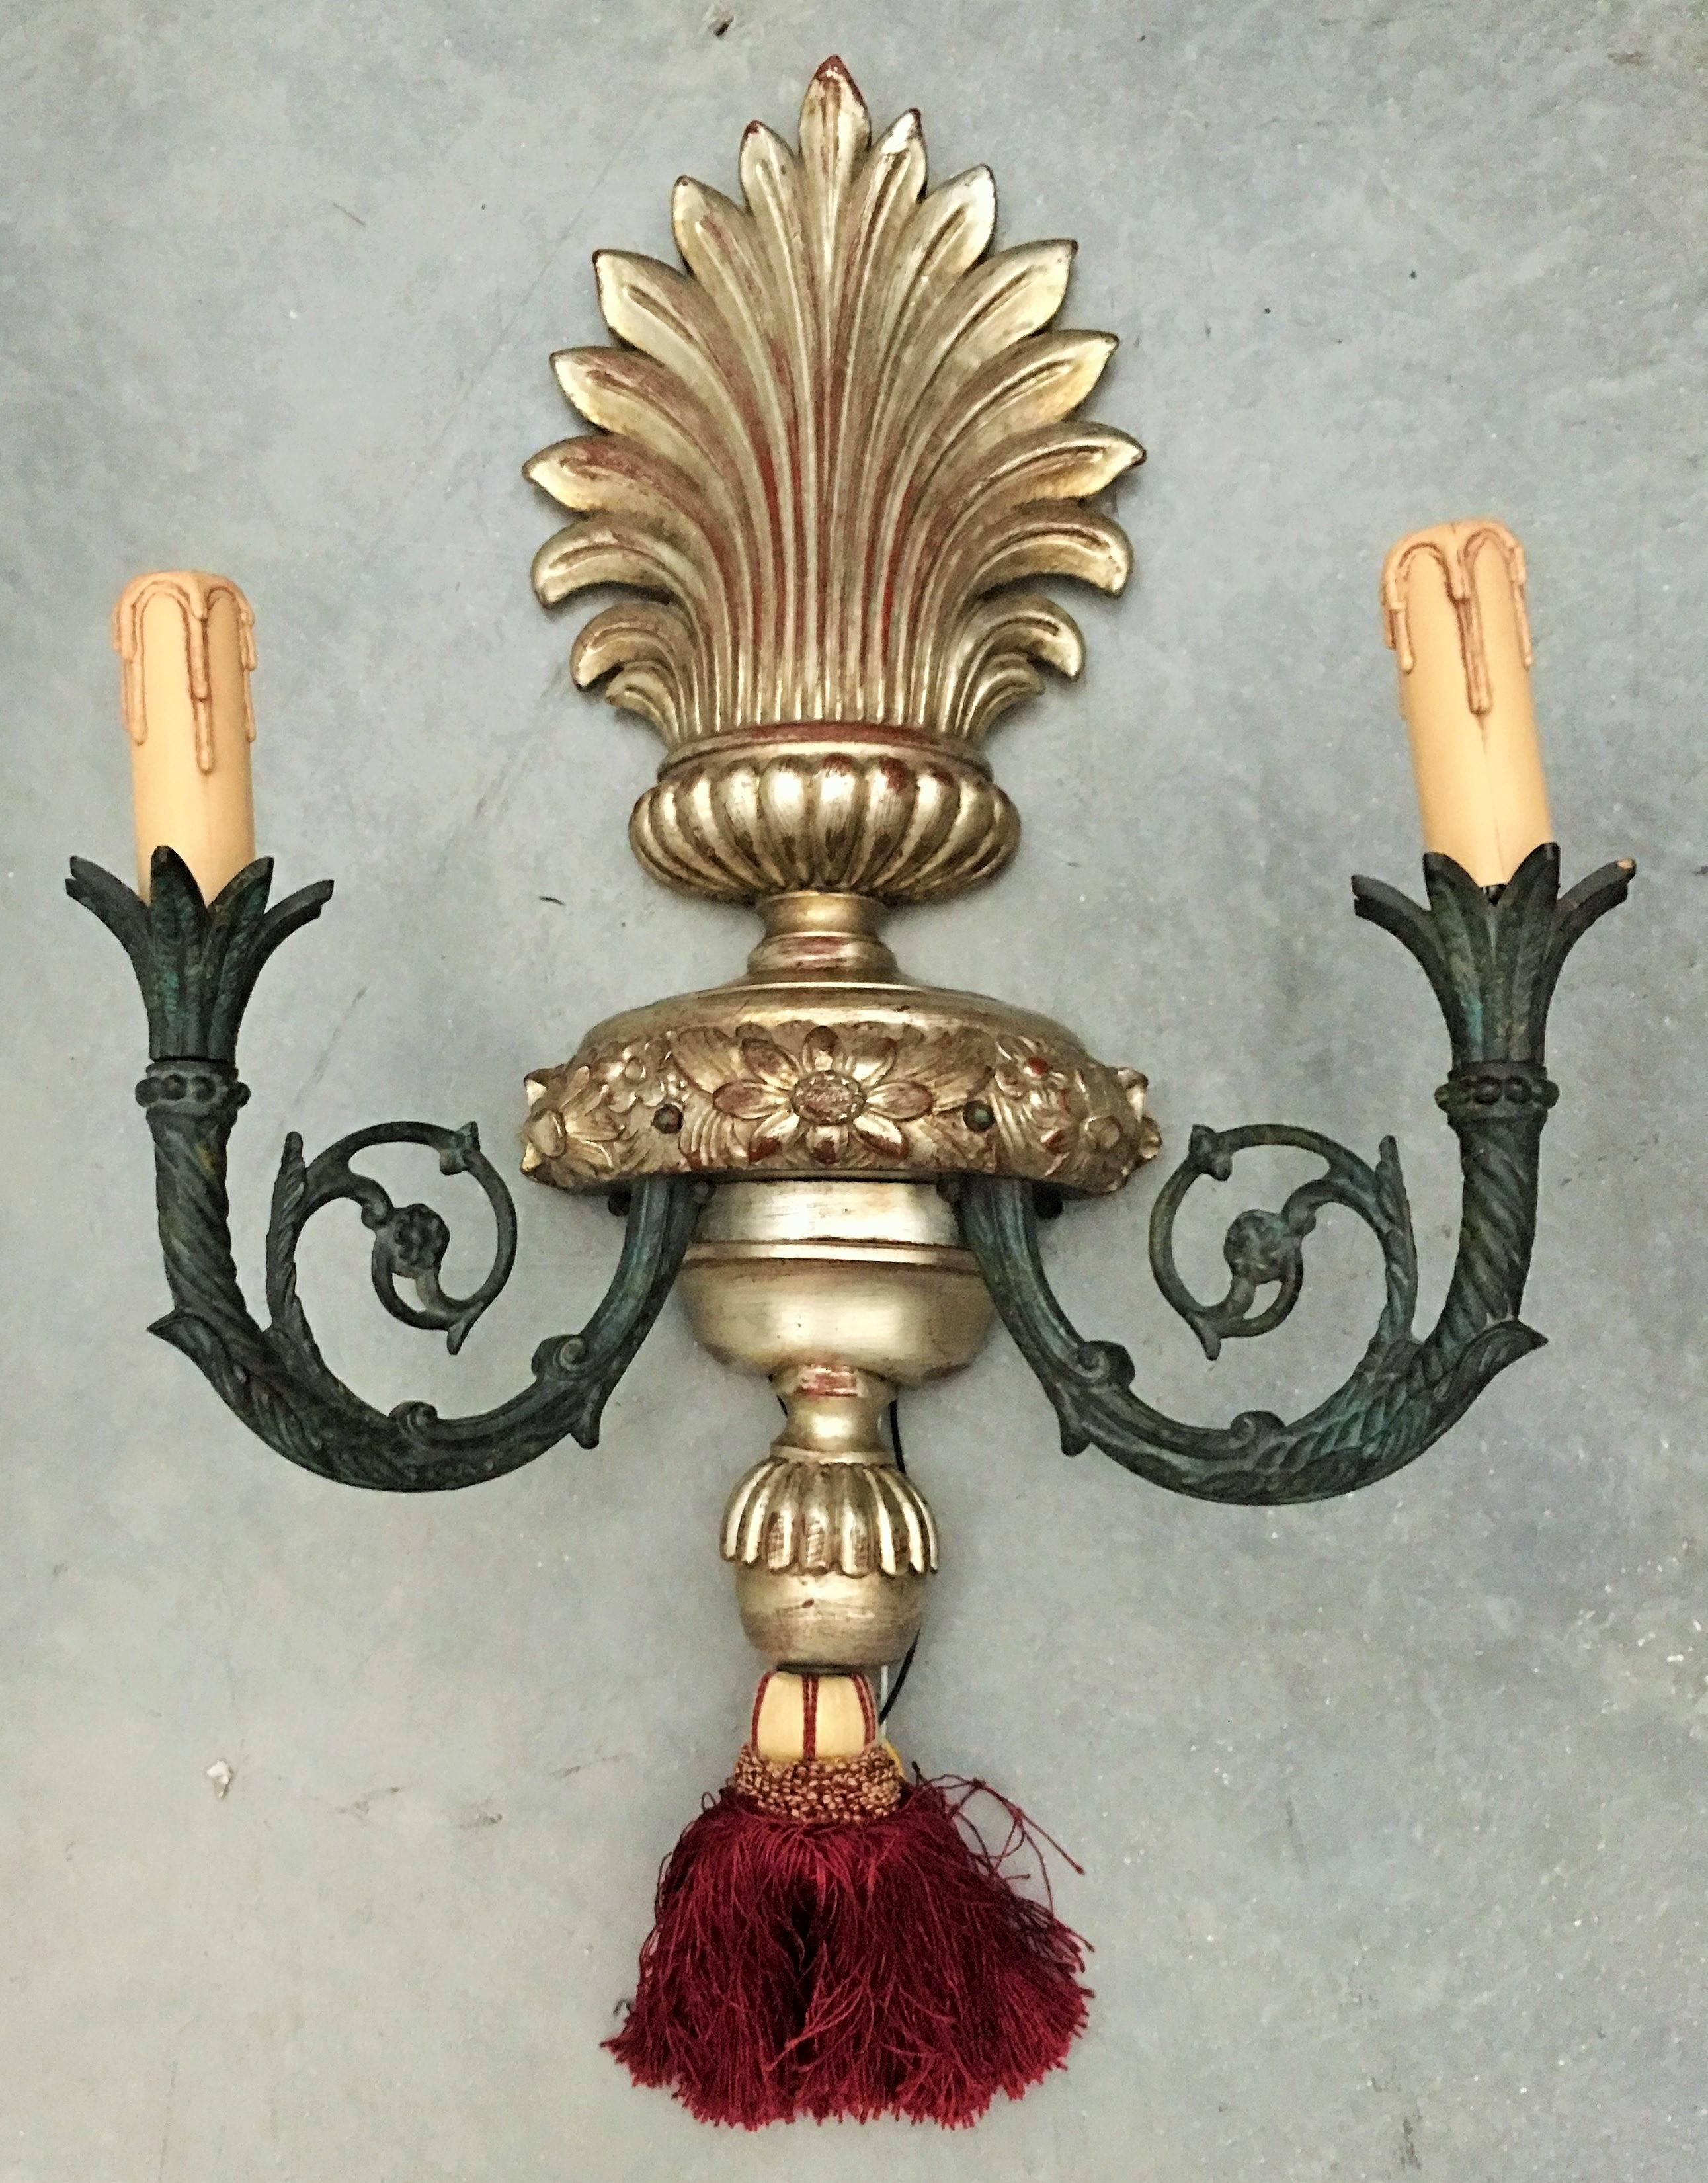 Pair of bronze two-lights Caldwell sconces with urn-shaped backplate. Original patina. 
Beautiful and elegant pair of Italian wood and iron sconces.